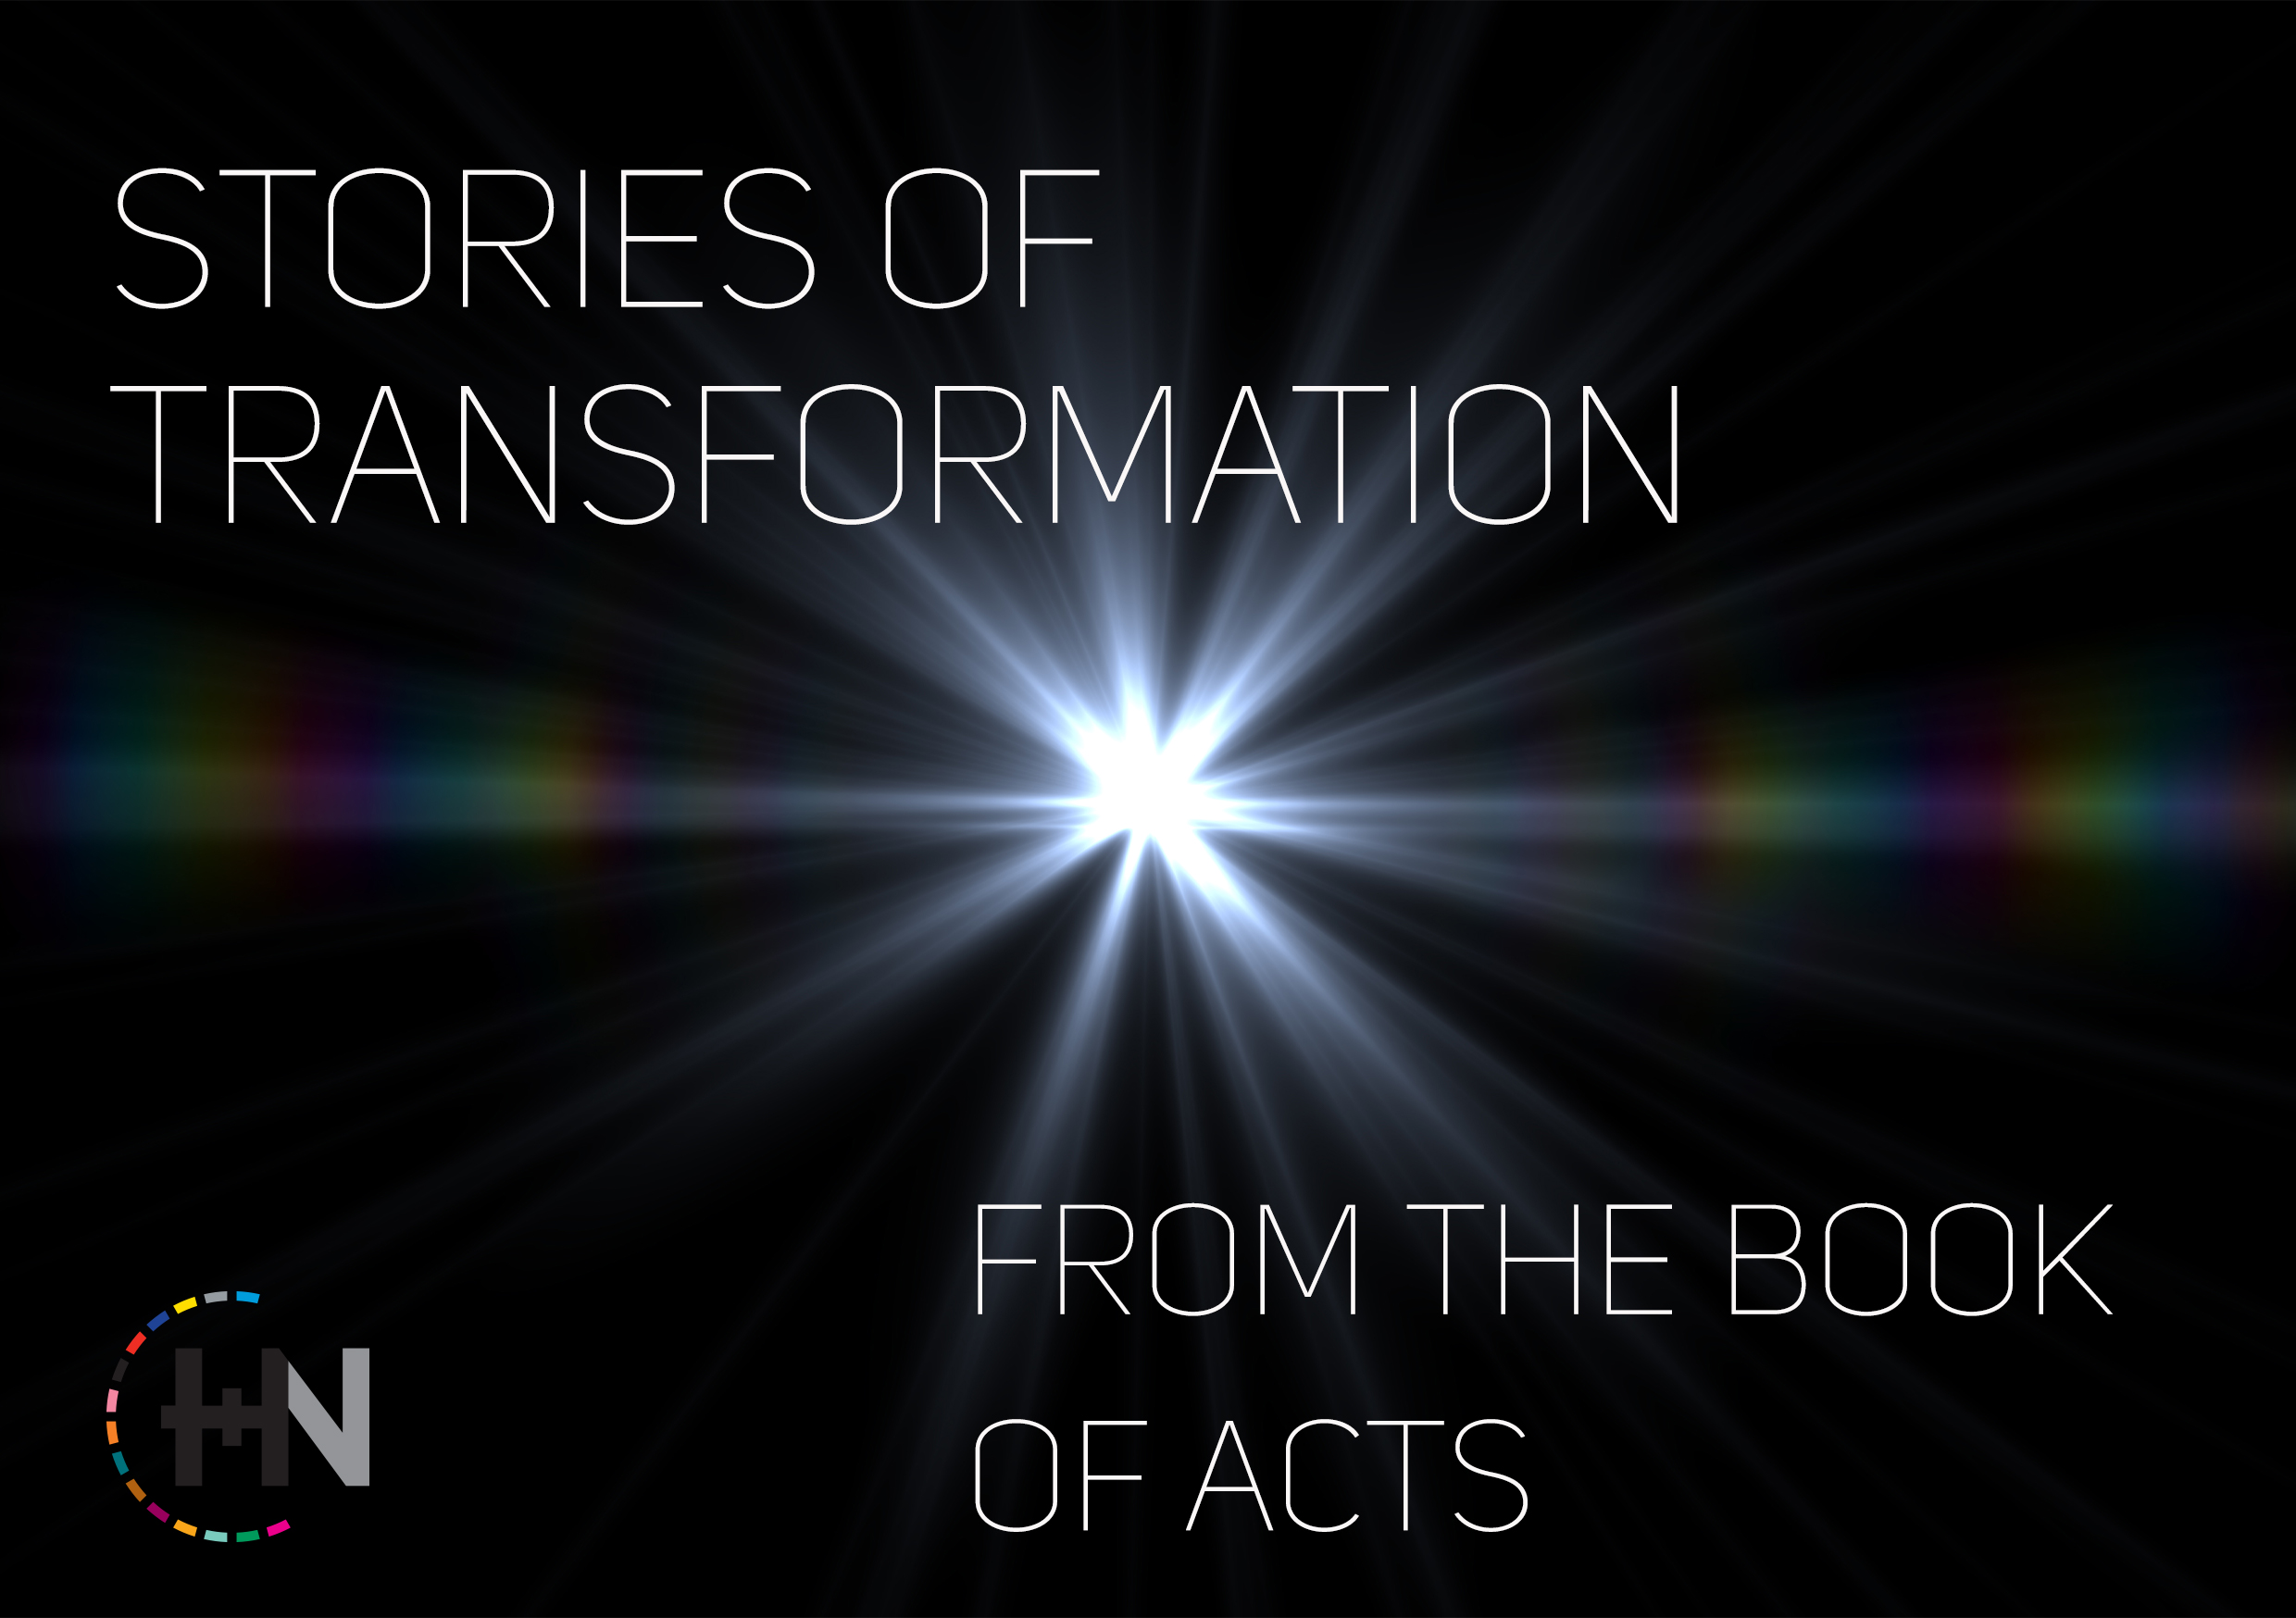 Stories of Transformation – Part 2